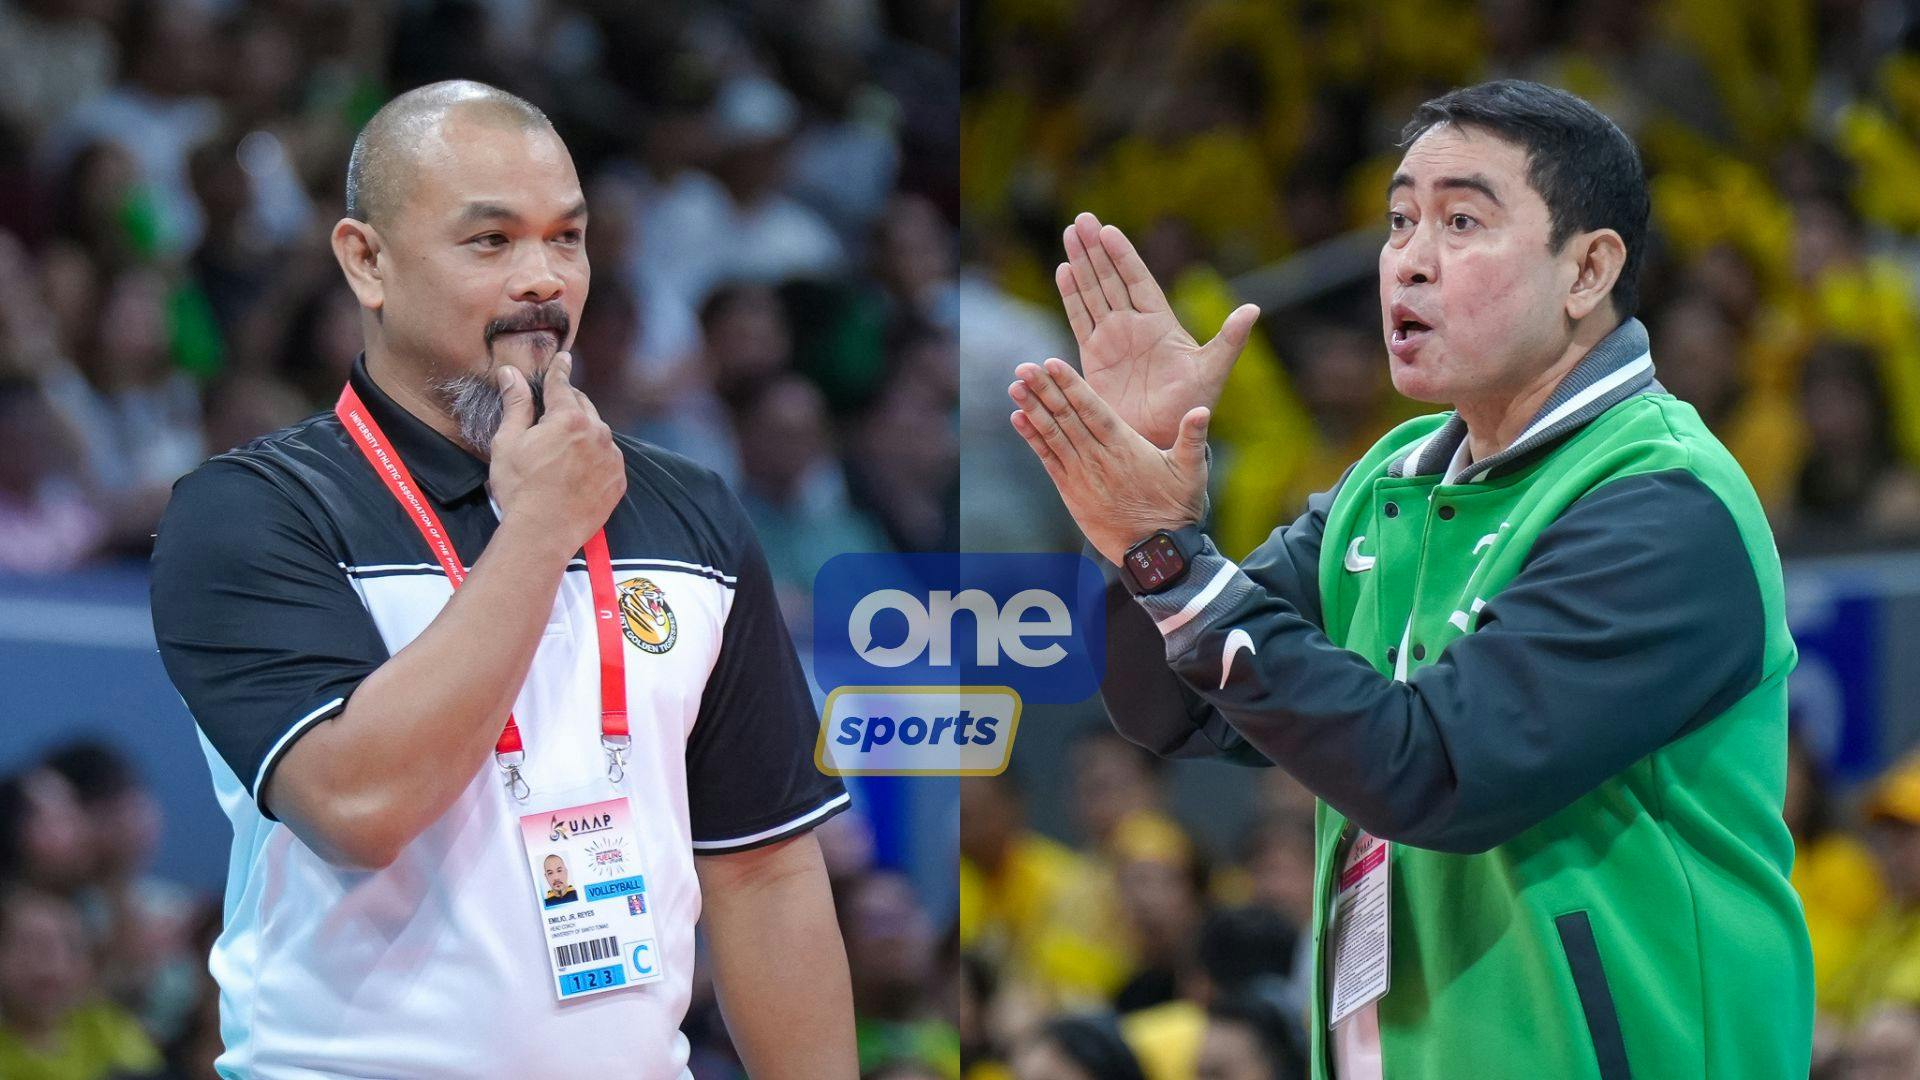 UAAP: UST’s Kungfu Reyes relishes coaching duels with DLSU’s Ramil De Jesus after thrilling Final Four battle